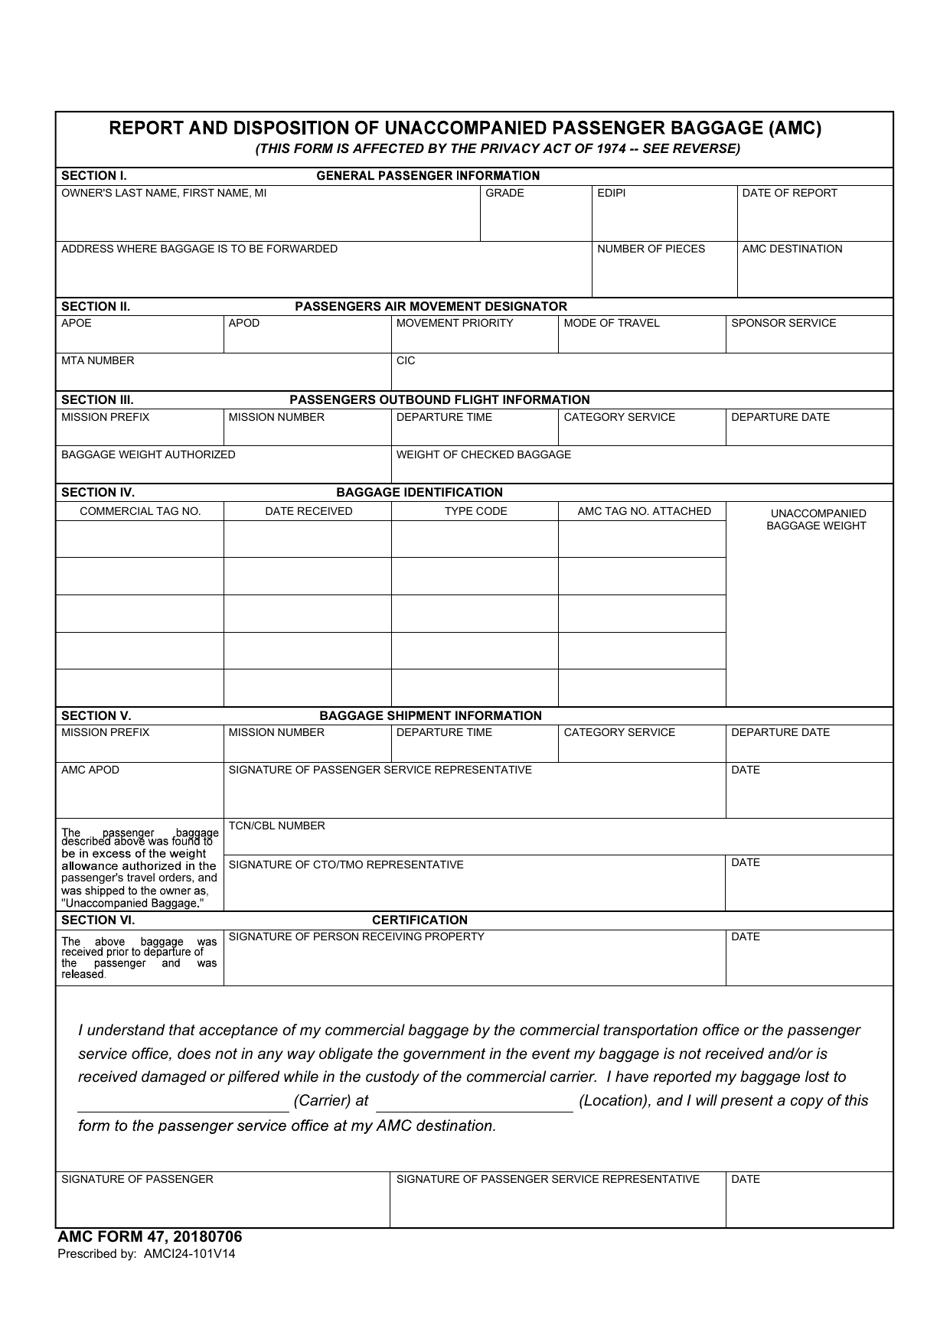 AMC Form 47 Fill Out, Sign Online and Download Fillable PDF